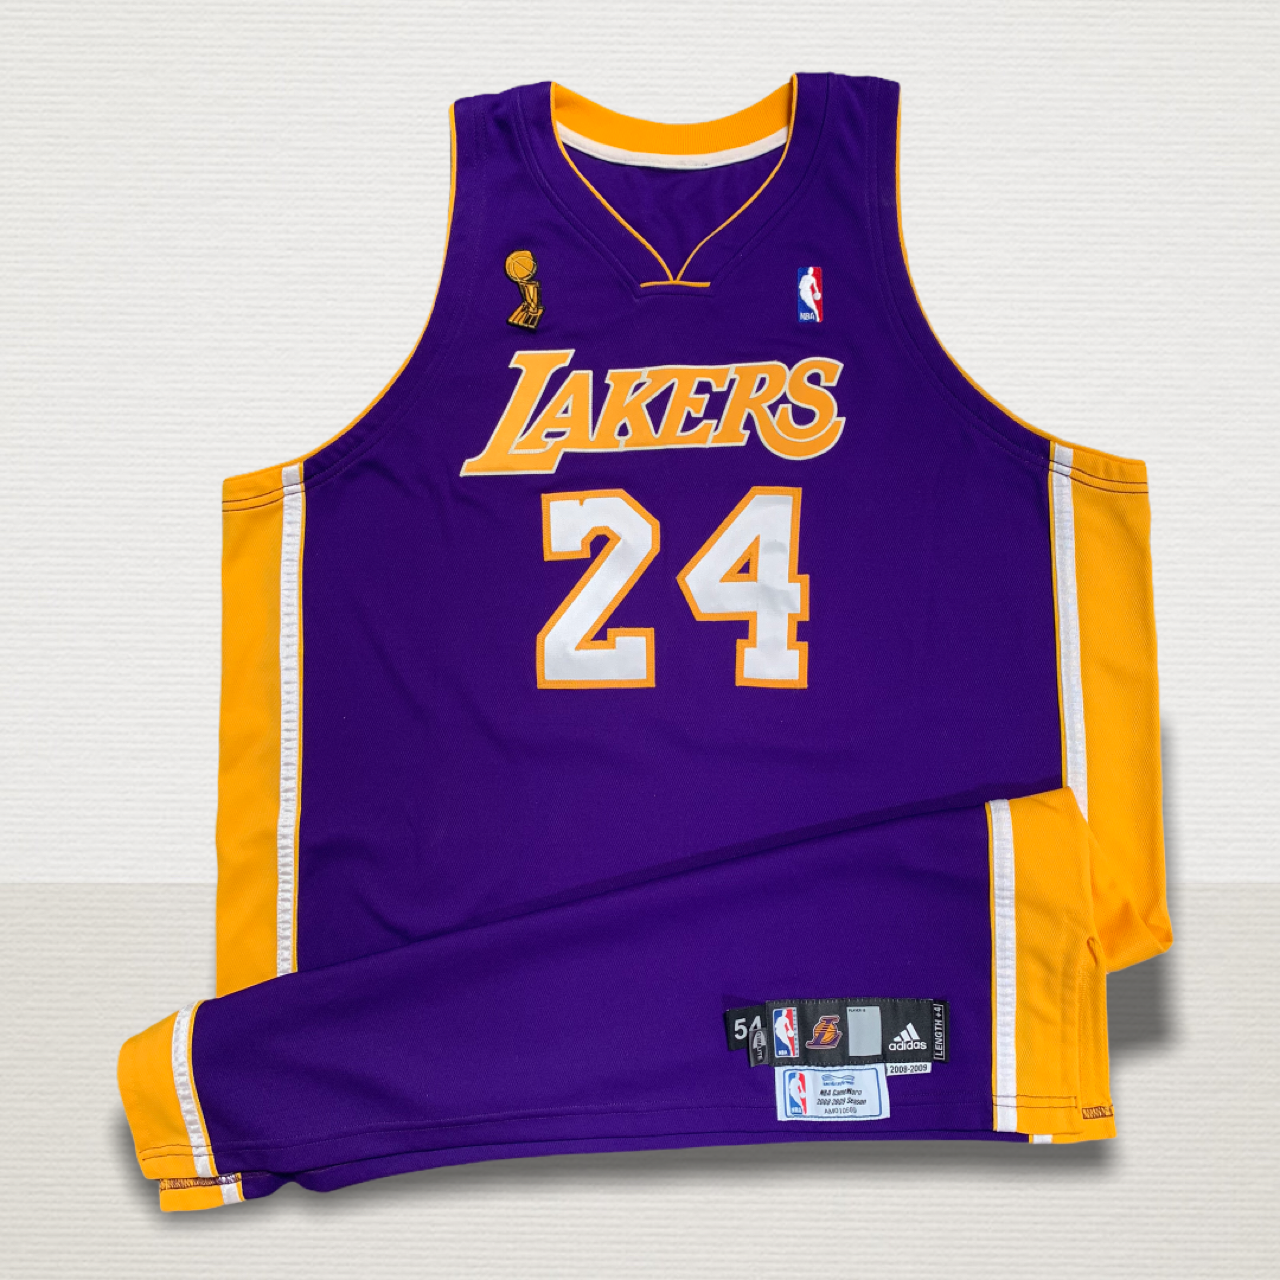 A jersey worn by the late Kobe Bryant when the Los Angeles Lakers won the NBA Championship in 2009 has sold for a record $337,334 at auction ©Grey Flannel Auctions